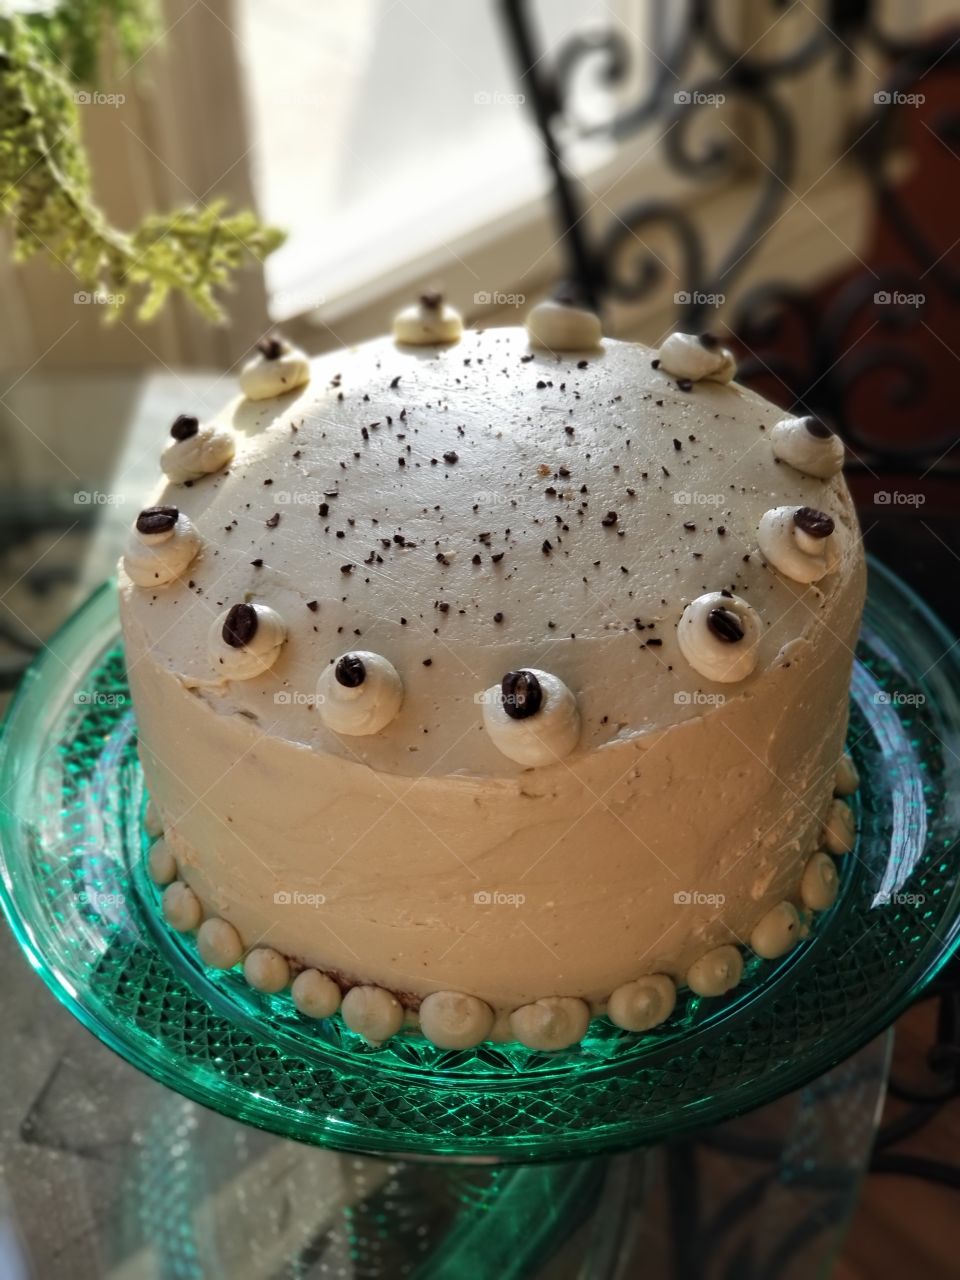 Decorated layer cake with espresso beans